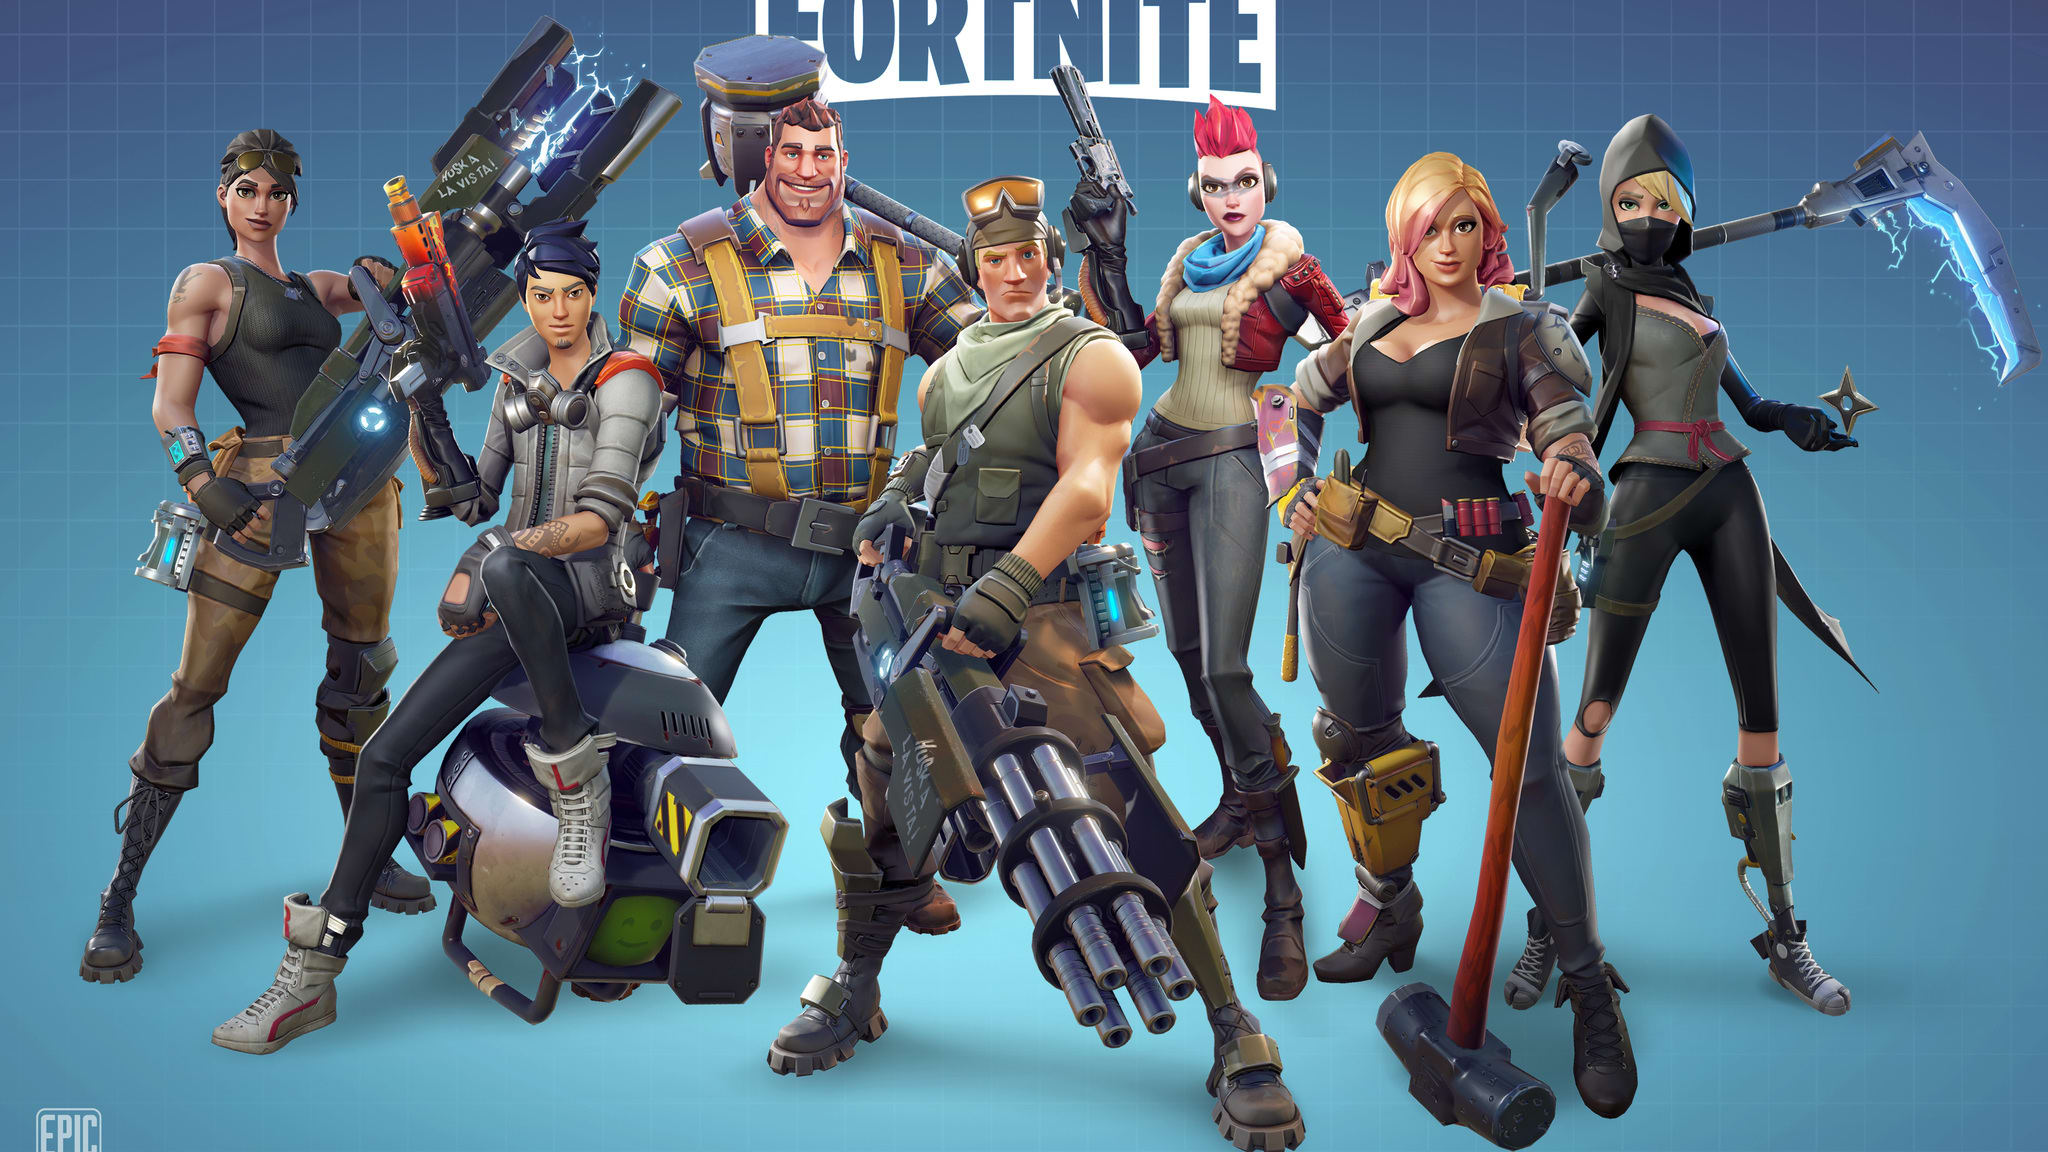 We Can Play Fortnite Together By Liam1122